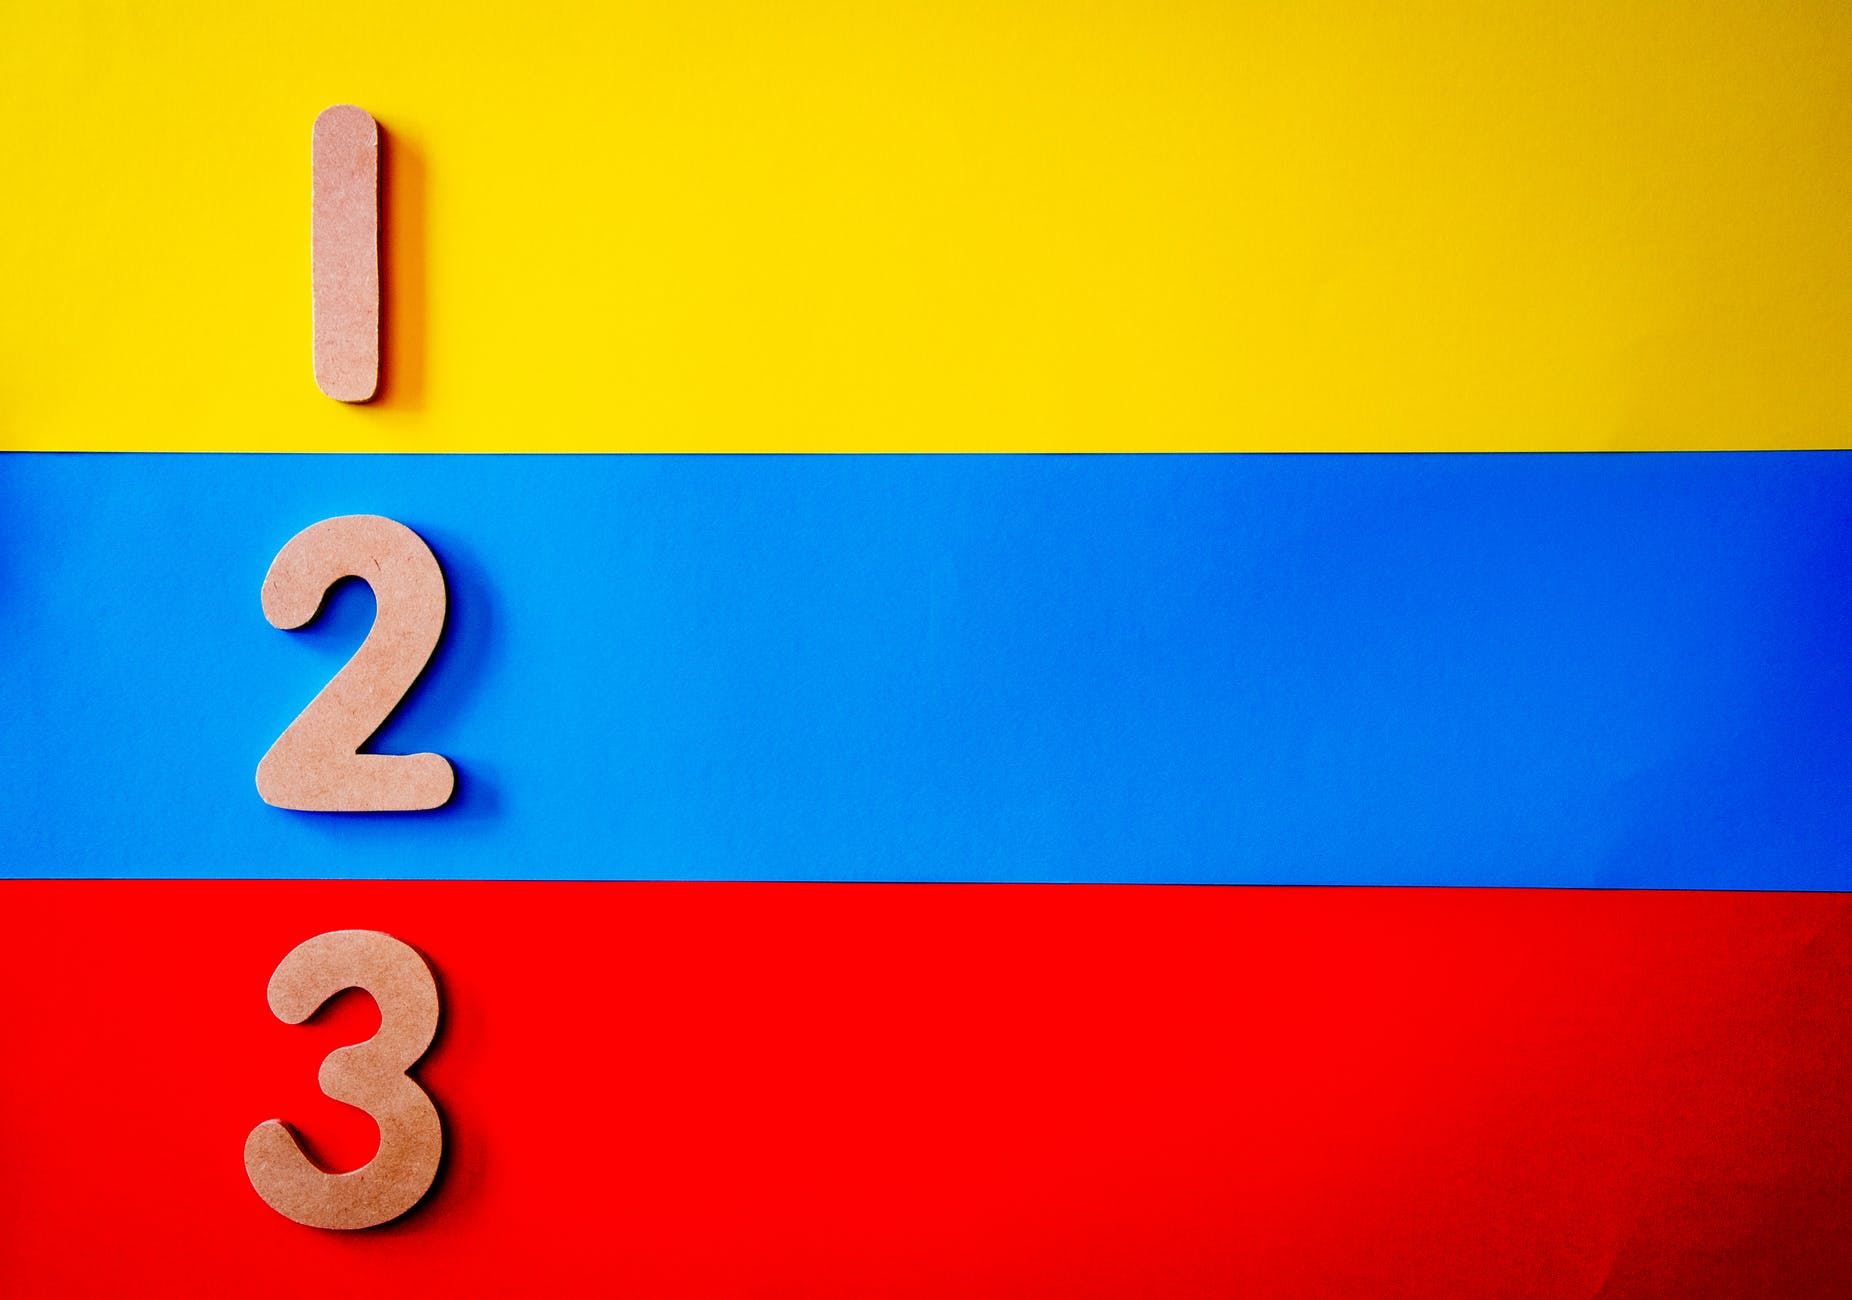 The numbers 1, 2 and 3 on a striped background